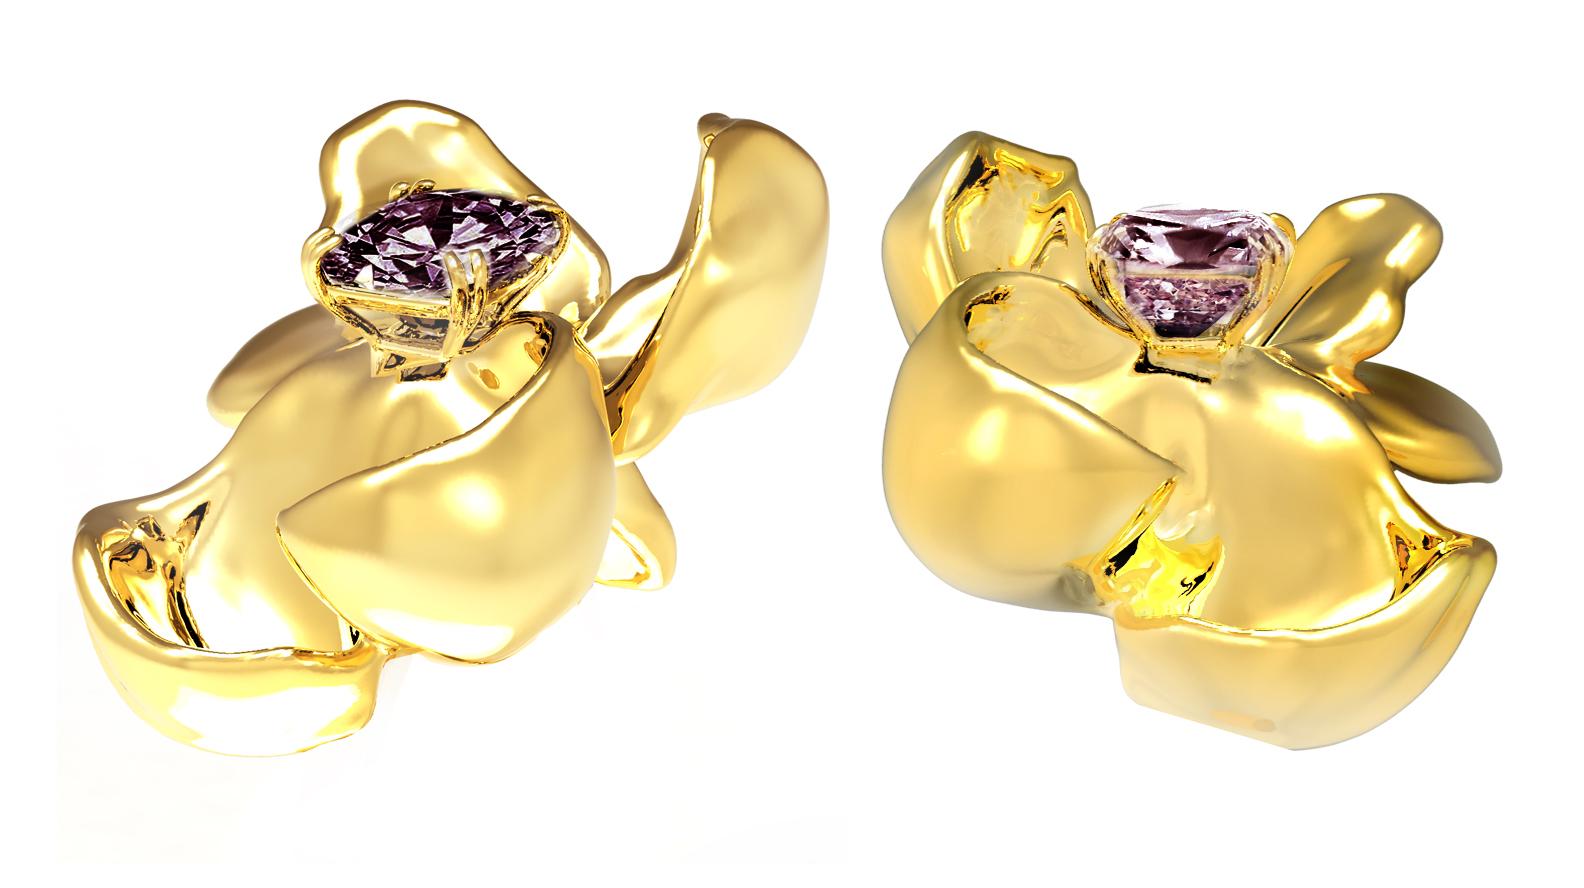 These Magnolia Flower Dimensional Contemporary clip-on earrings are in 18 karat yellow gold with storm purple cushion spinels (about 3 carats in total). The tender water-surface of the spinel multiplies the light, mirroring on the golden petals.